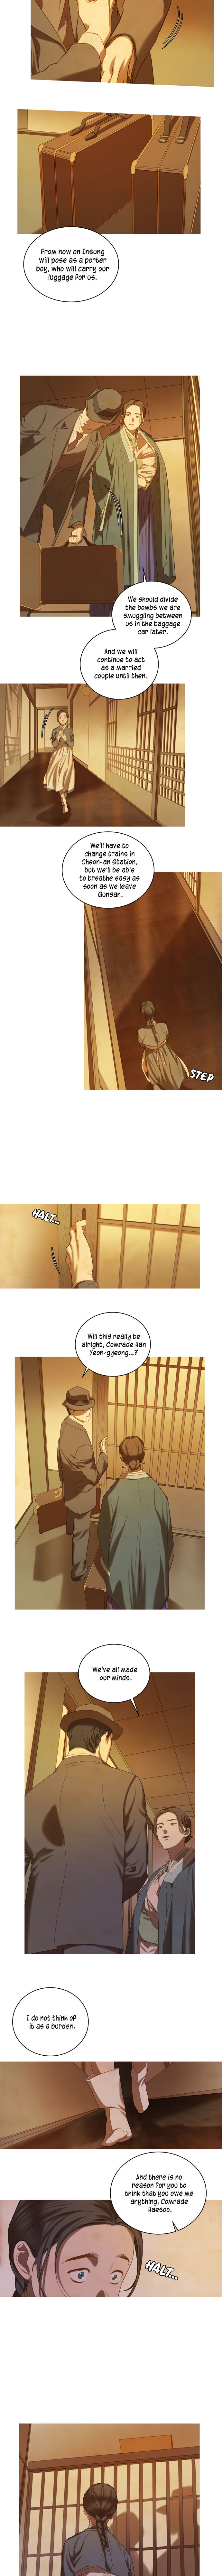 Gorae Byul - The Gyeongseong Mermaid - Chapter 7 Page 3